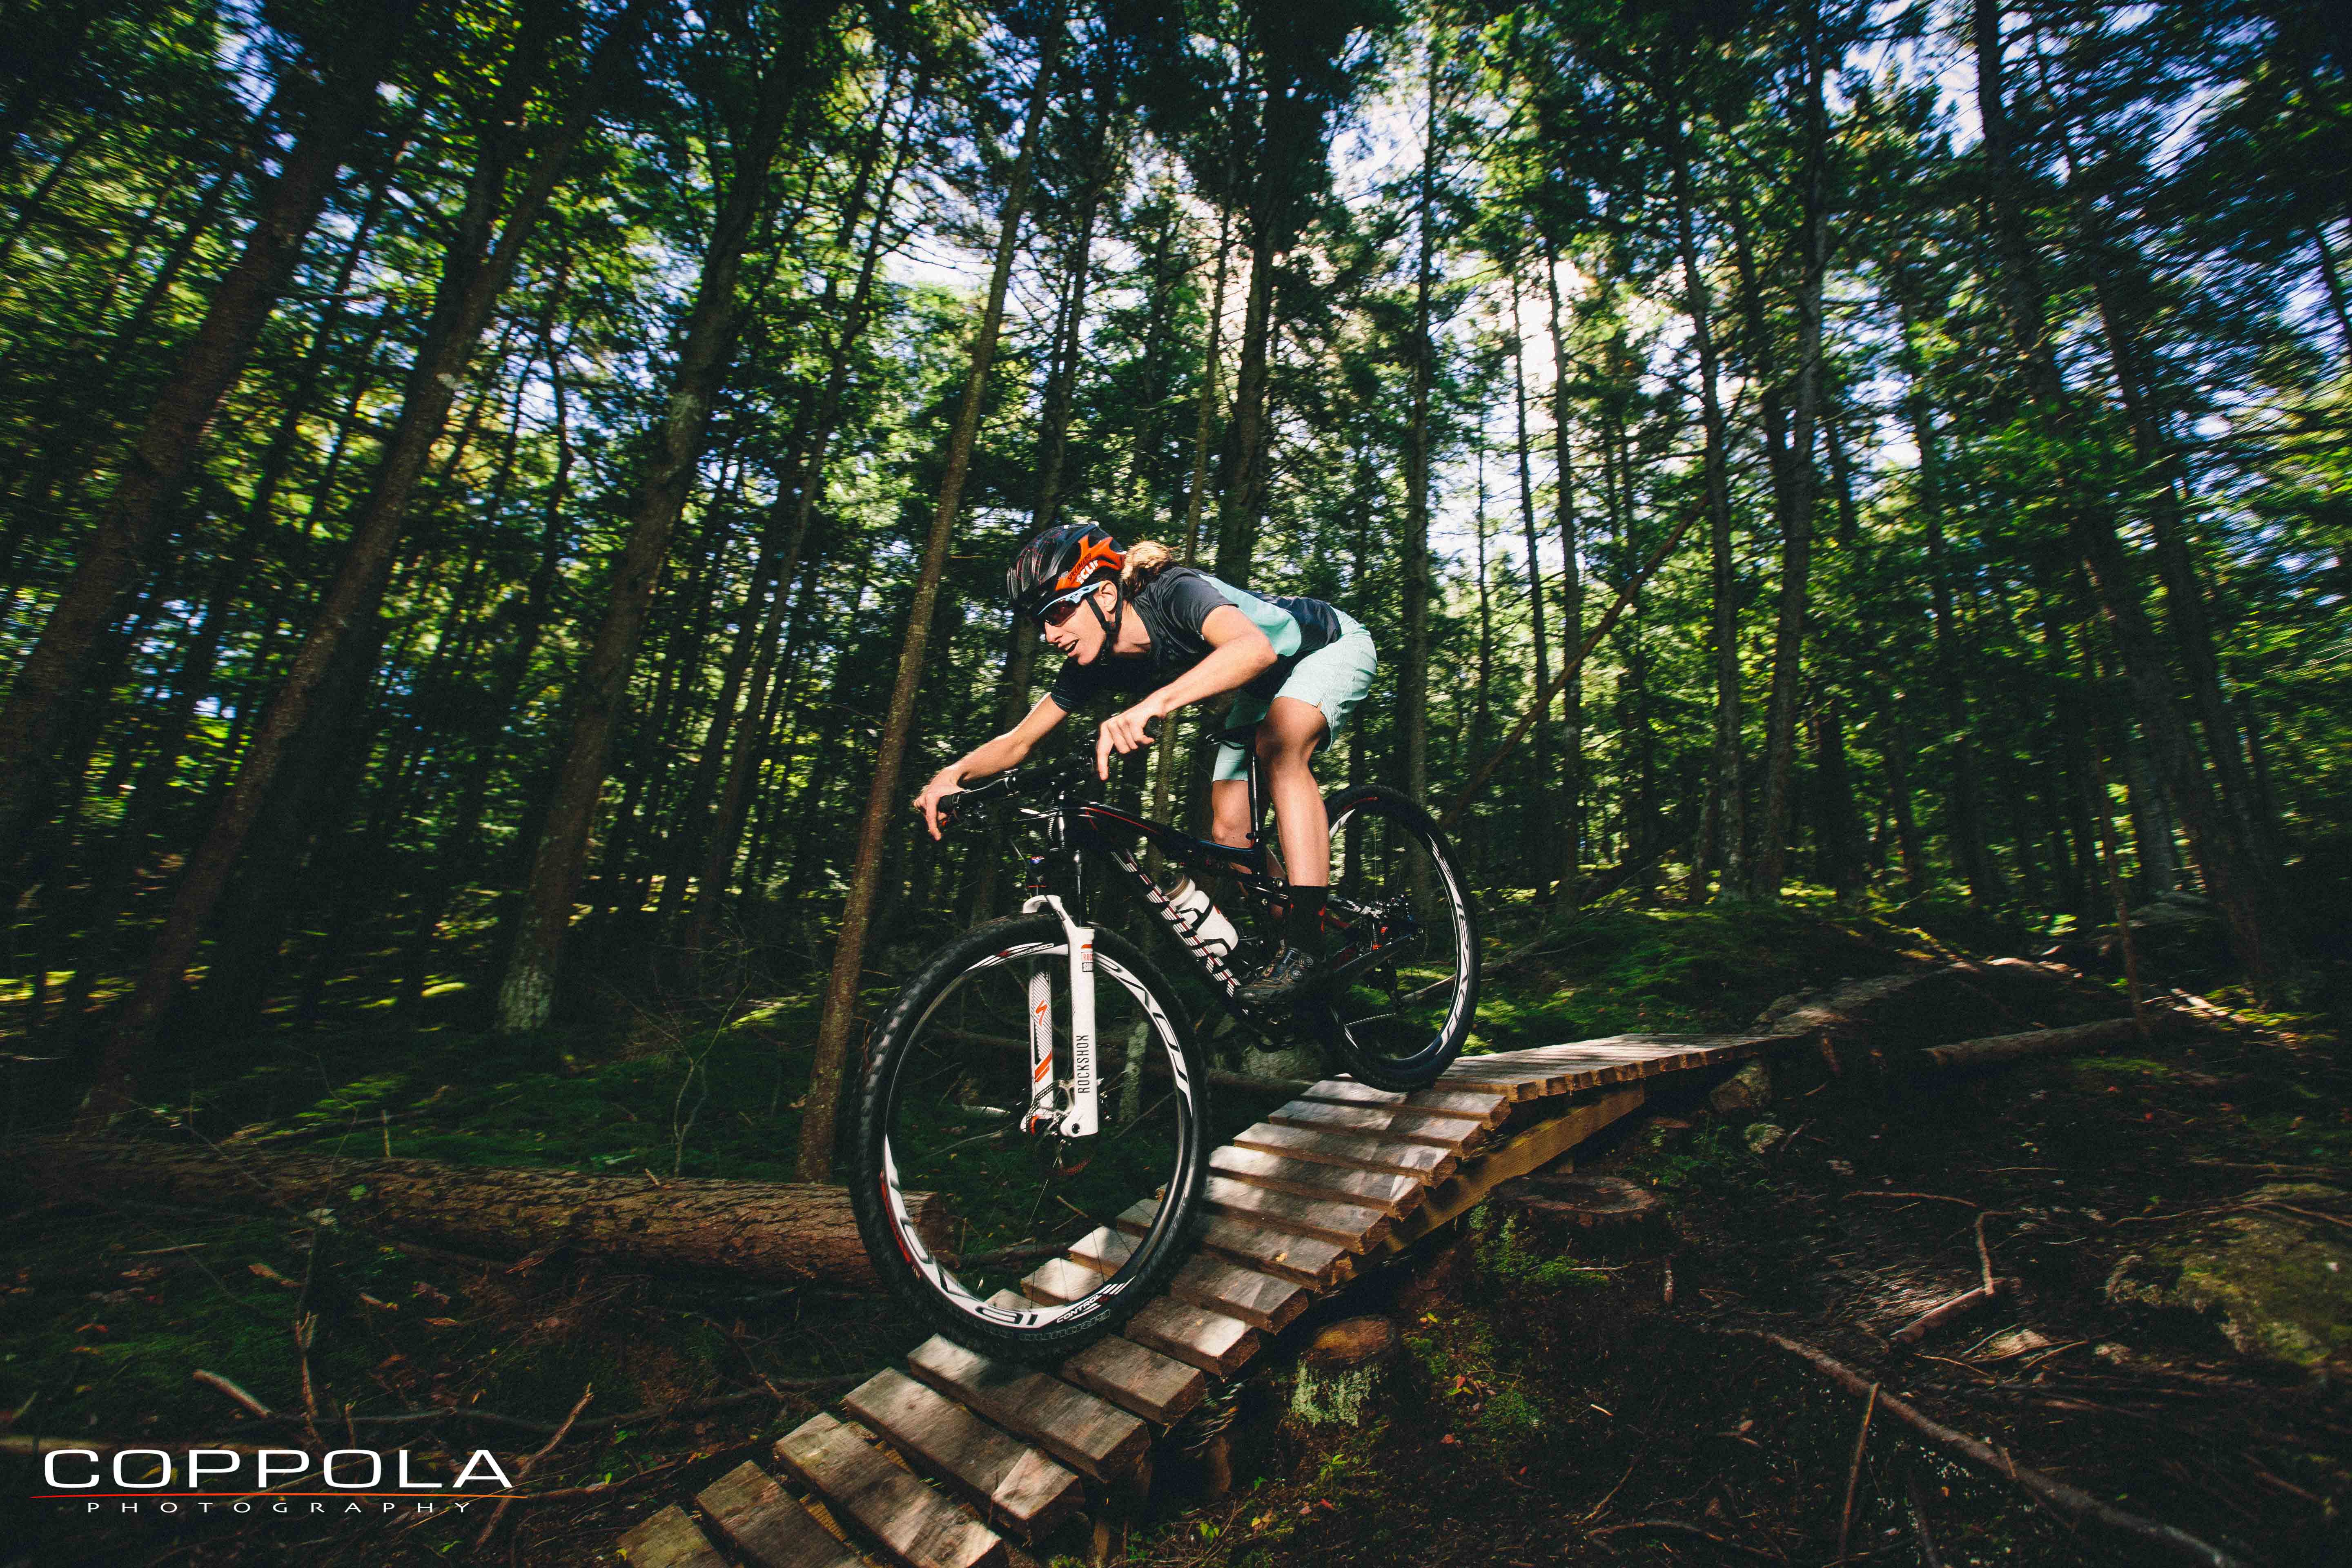 Coppola Photography: Lea Davison National Champion Mountain Biker, Team Specialized, Olympian. New England. Northeast. Woods and outdoor mountain bike images. Commercial.